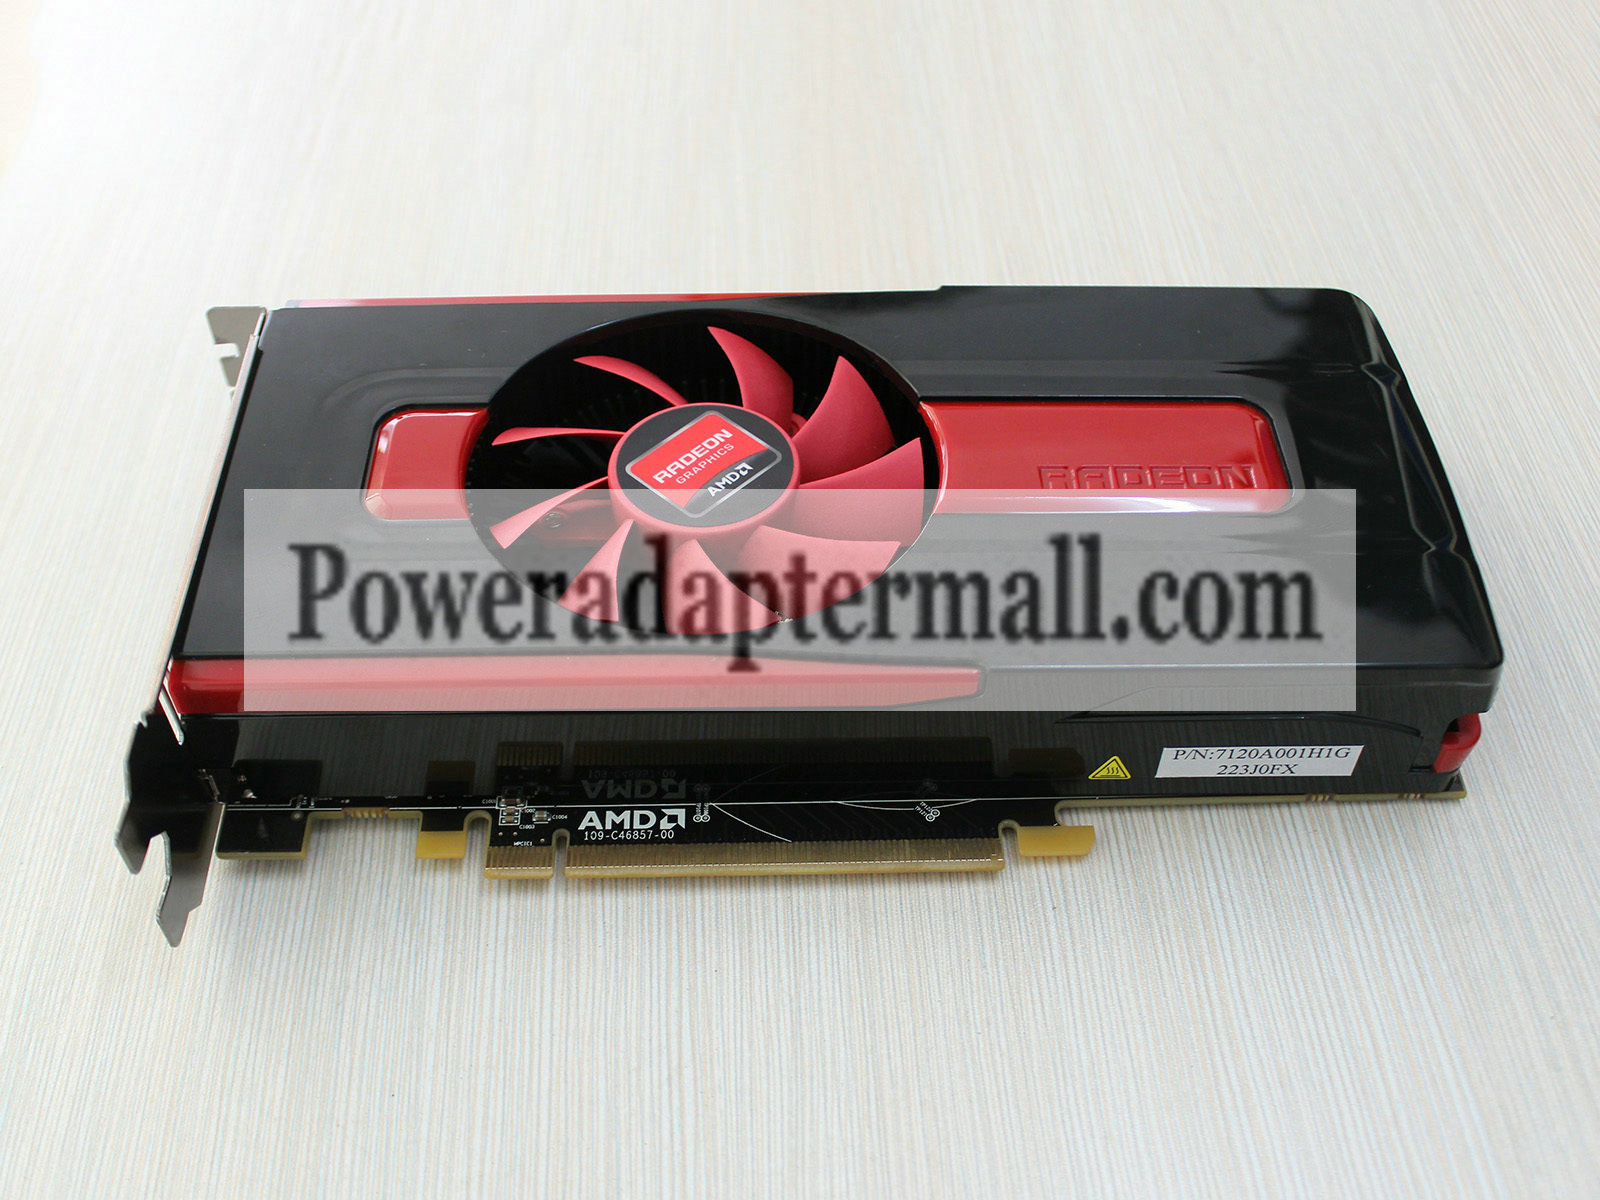 AMD HD8760 DDR5 710152-001 2GB Graphic card for Dell HP laptop